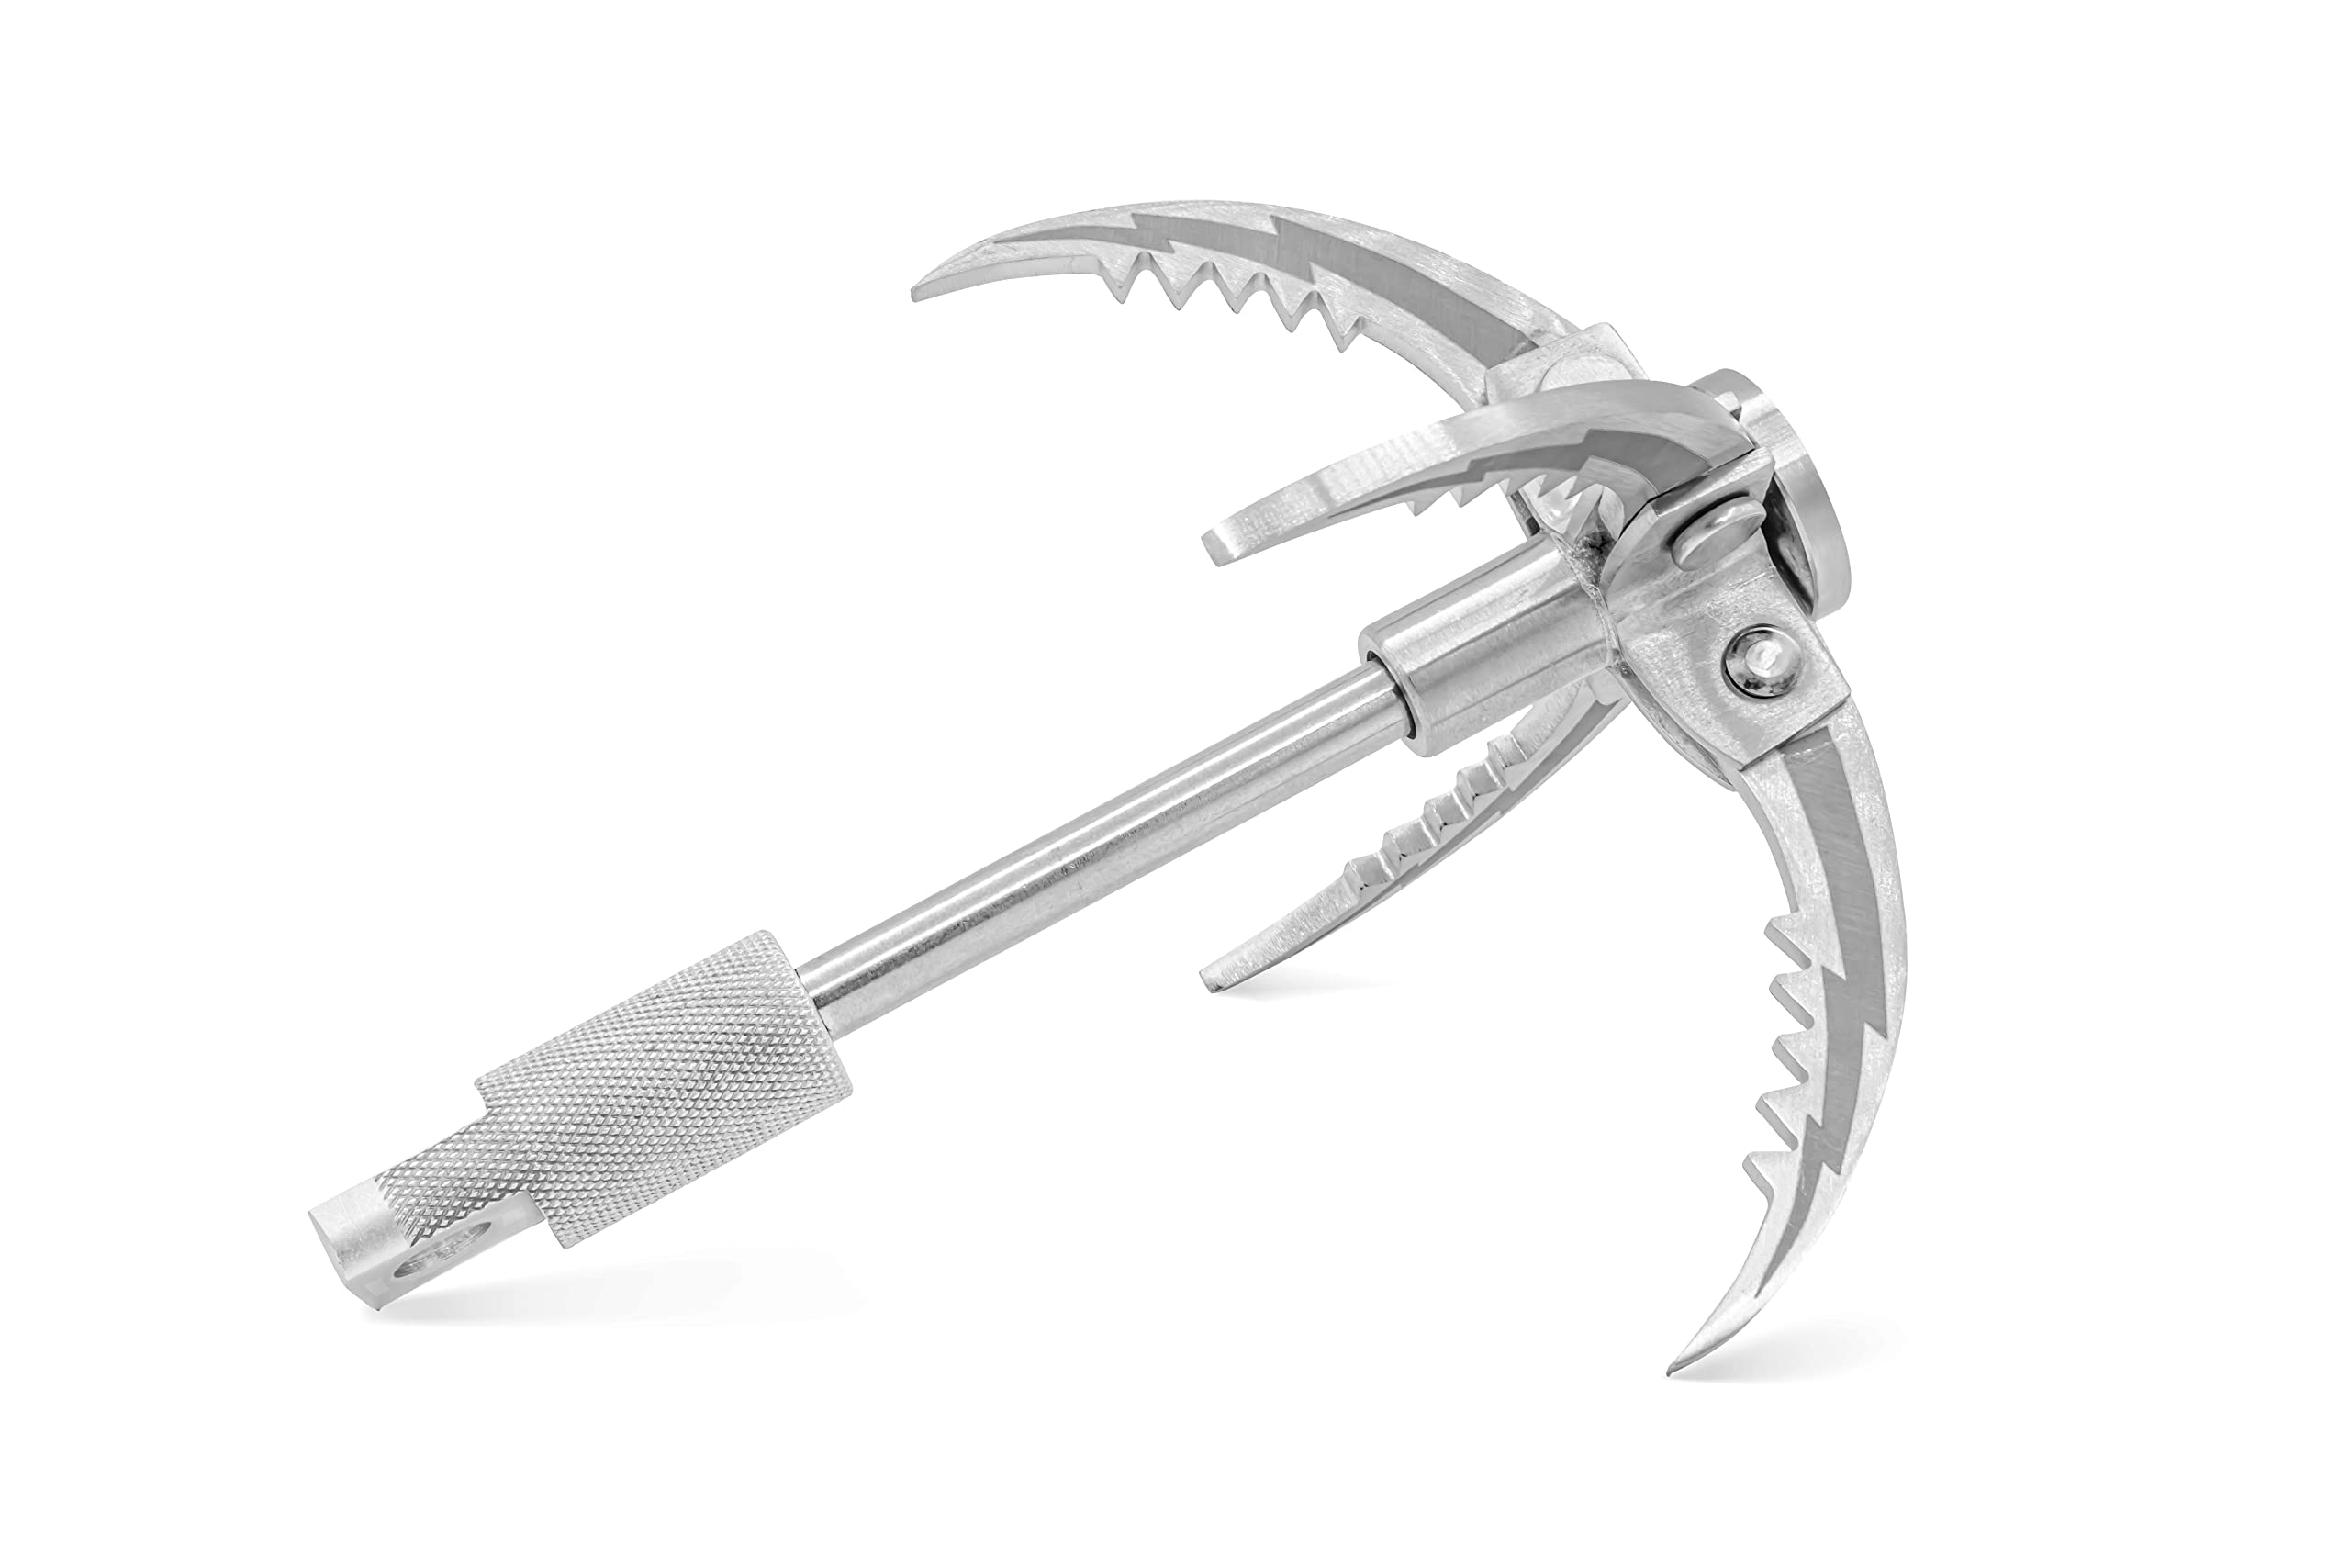 Grappling Hook Folding Survival Claw, Grappling Hook Folding Claw